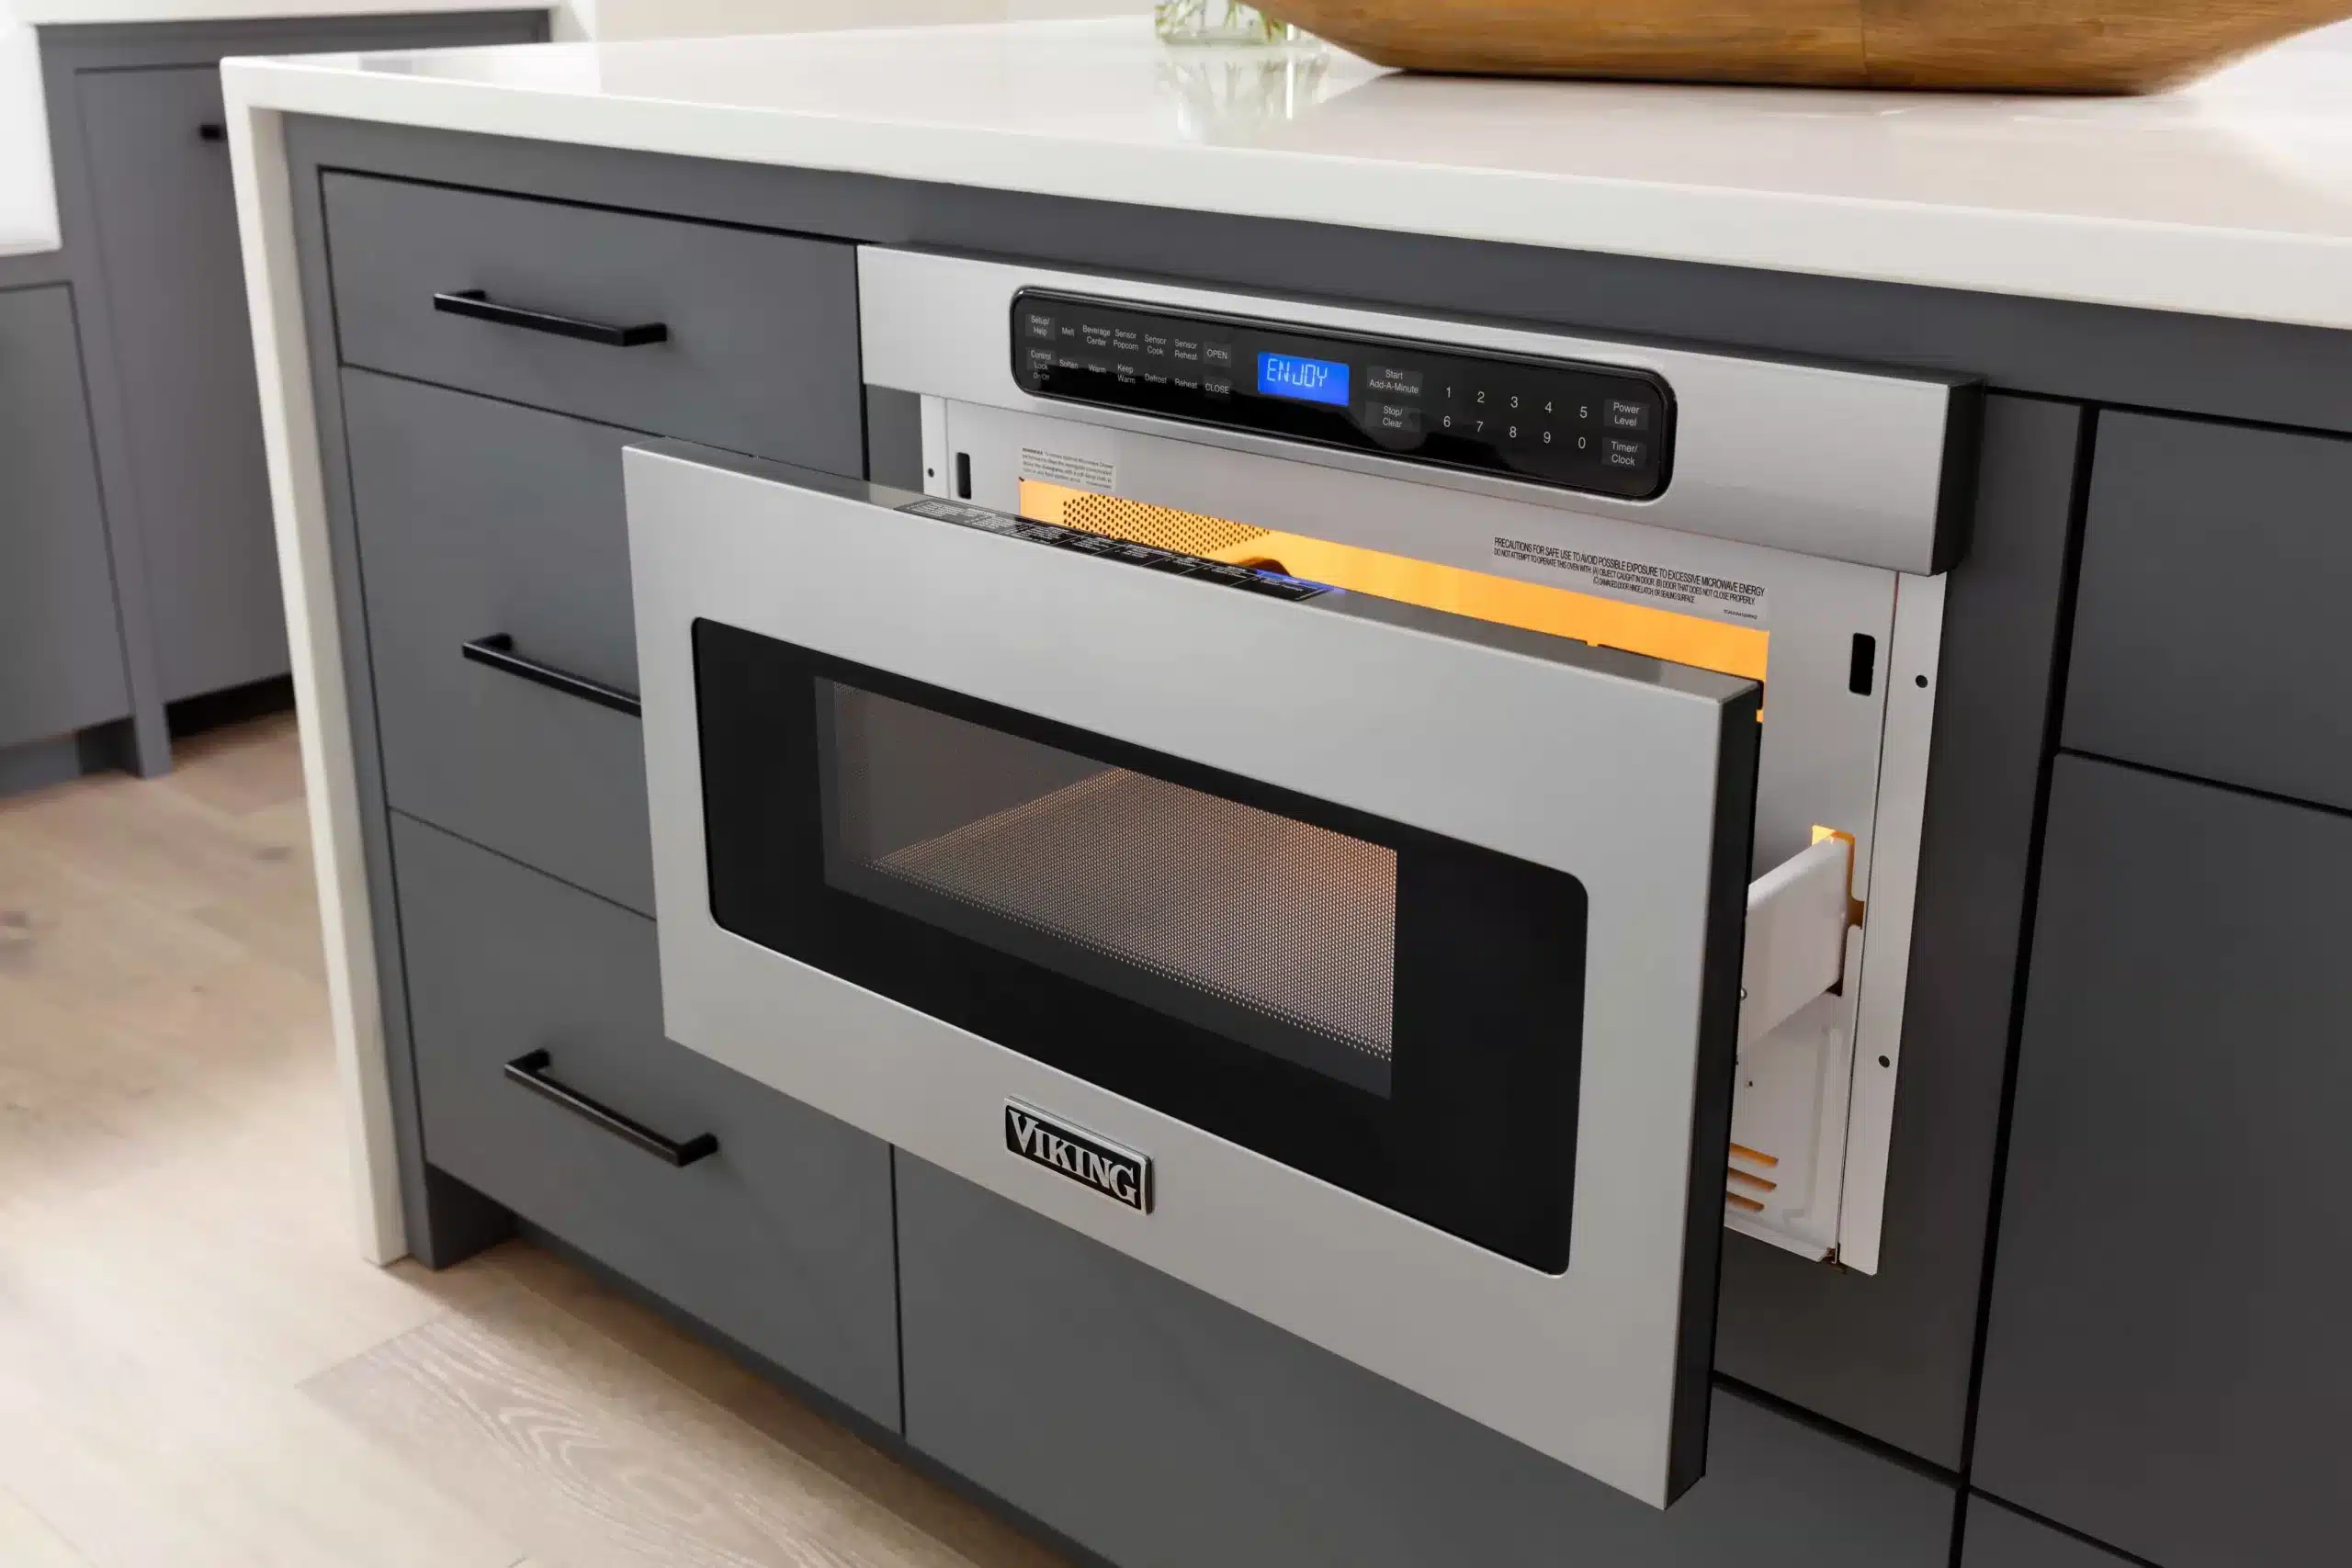 Get the Best of Both Worlds with the Viking Drawer Microwave